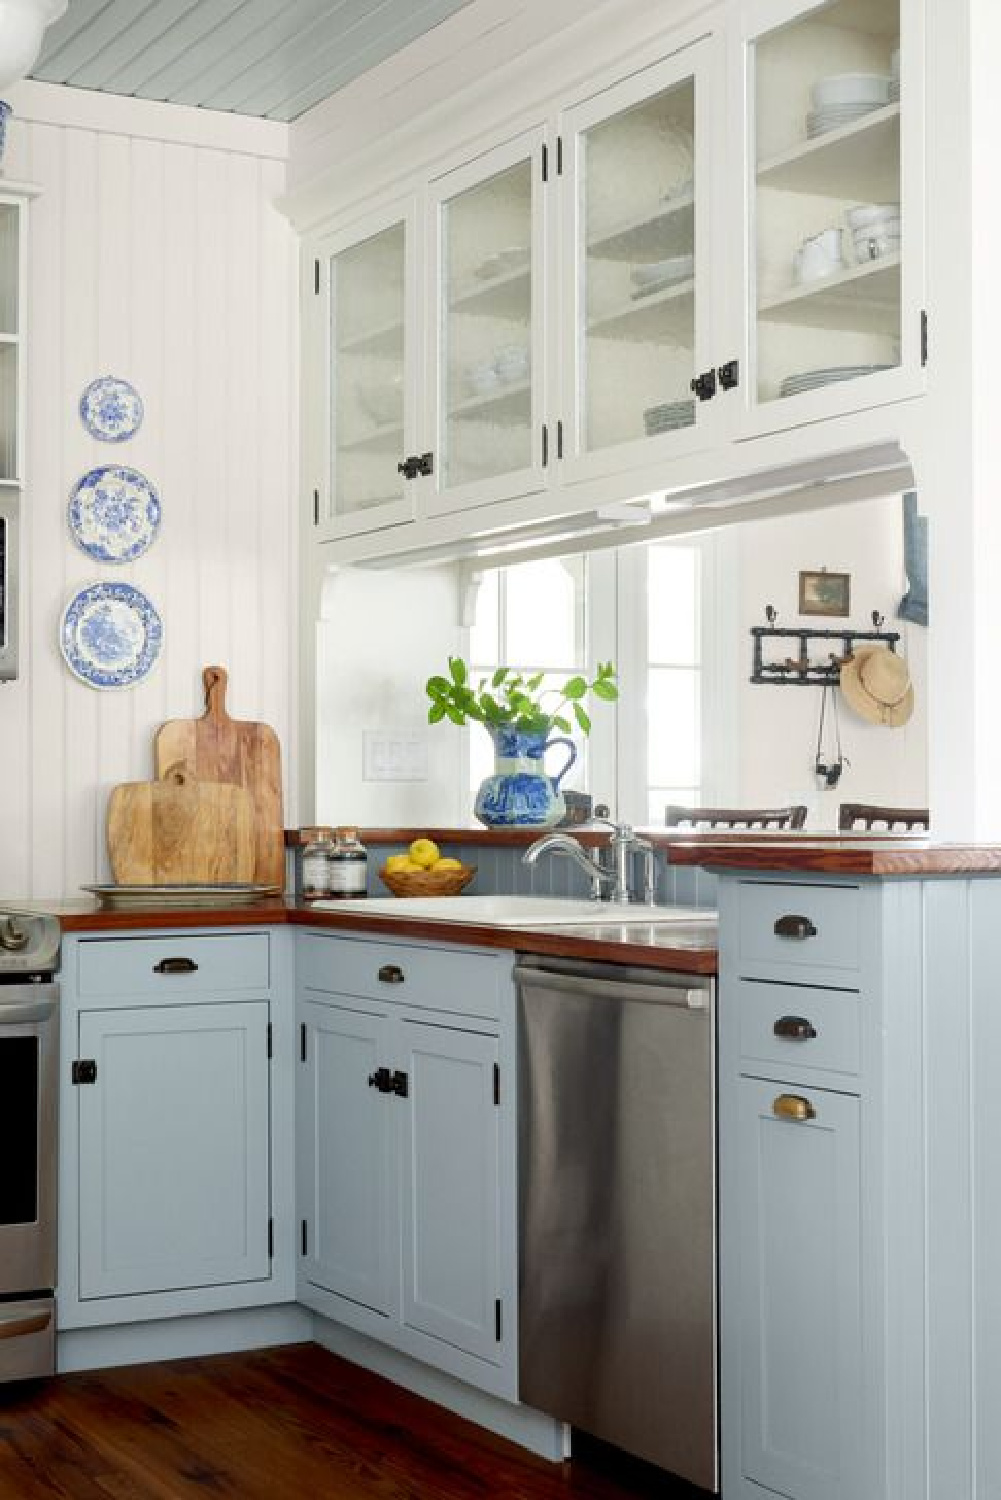 Blue kitchen base cabinets and white uppers in a beautiful country design - photo by David Hillegas. #bluekitchens #lightbluekitchen